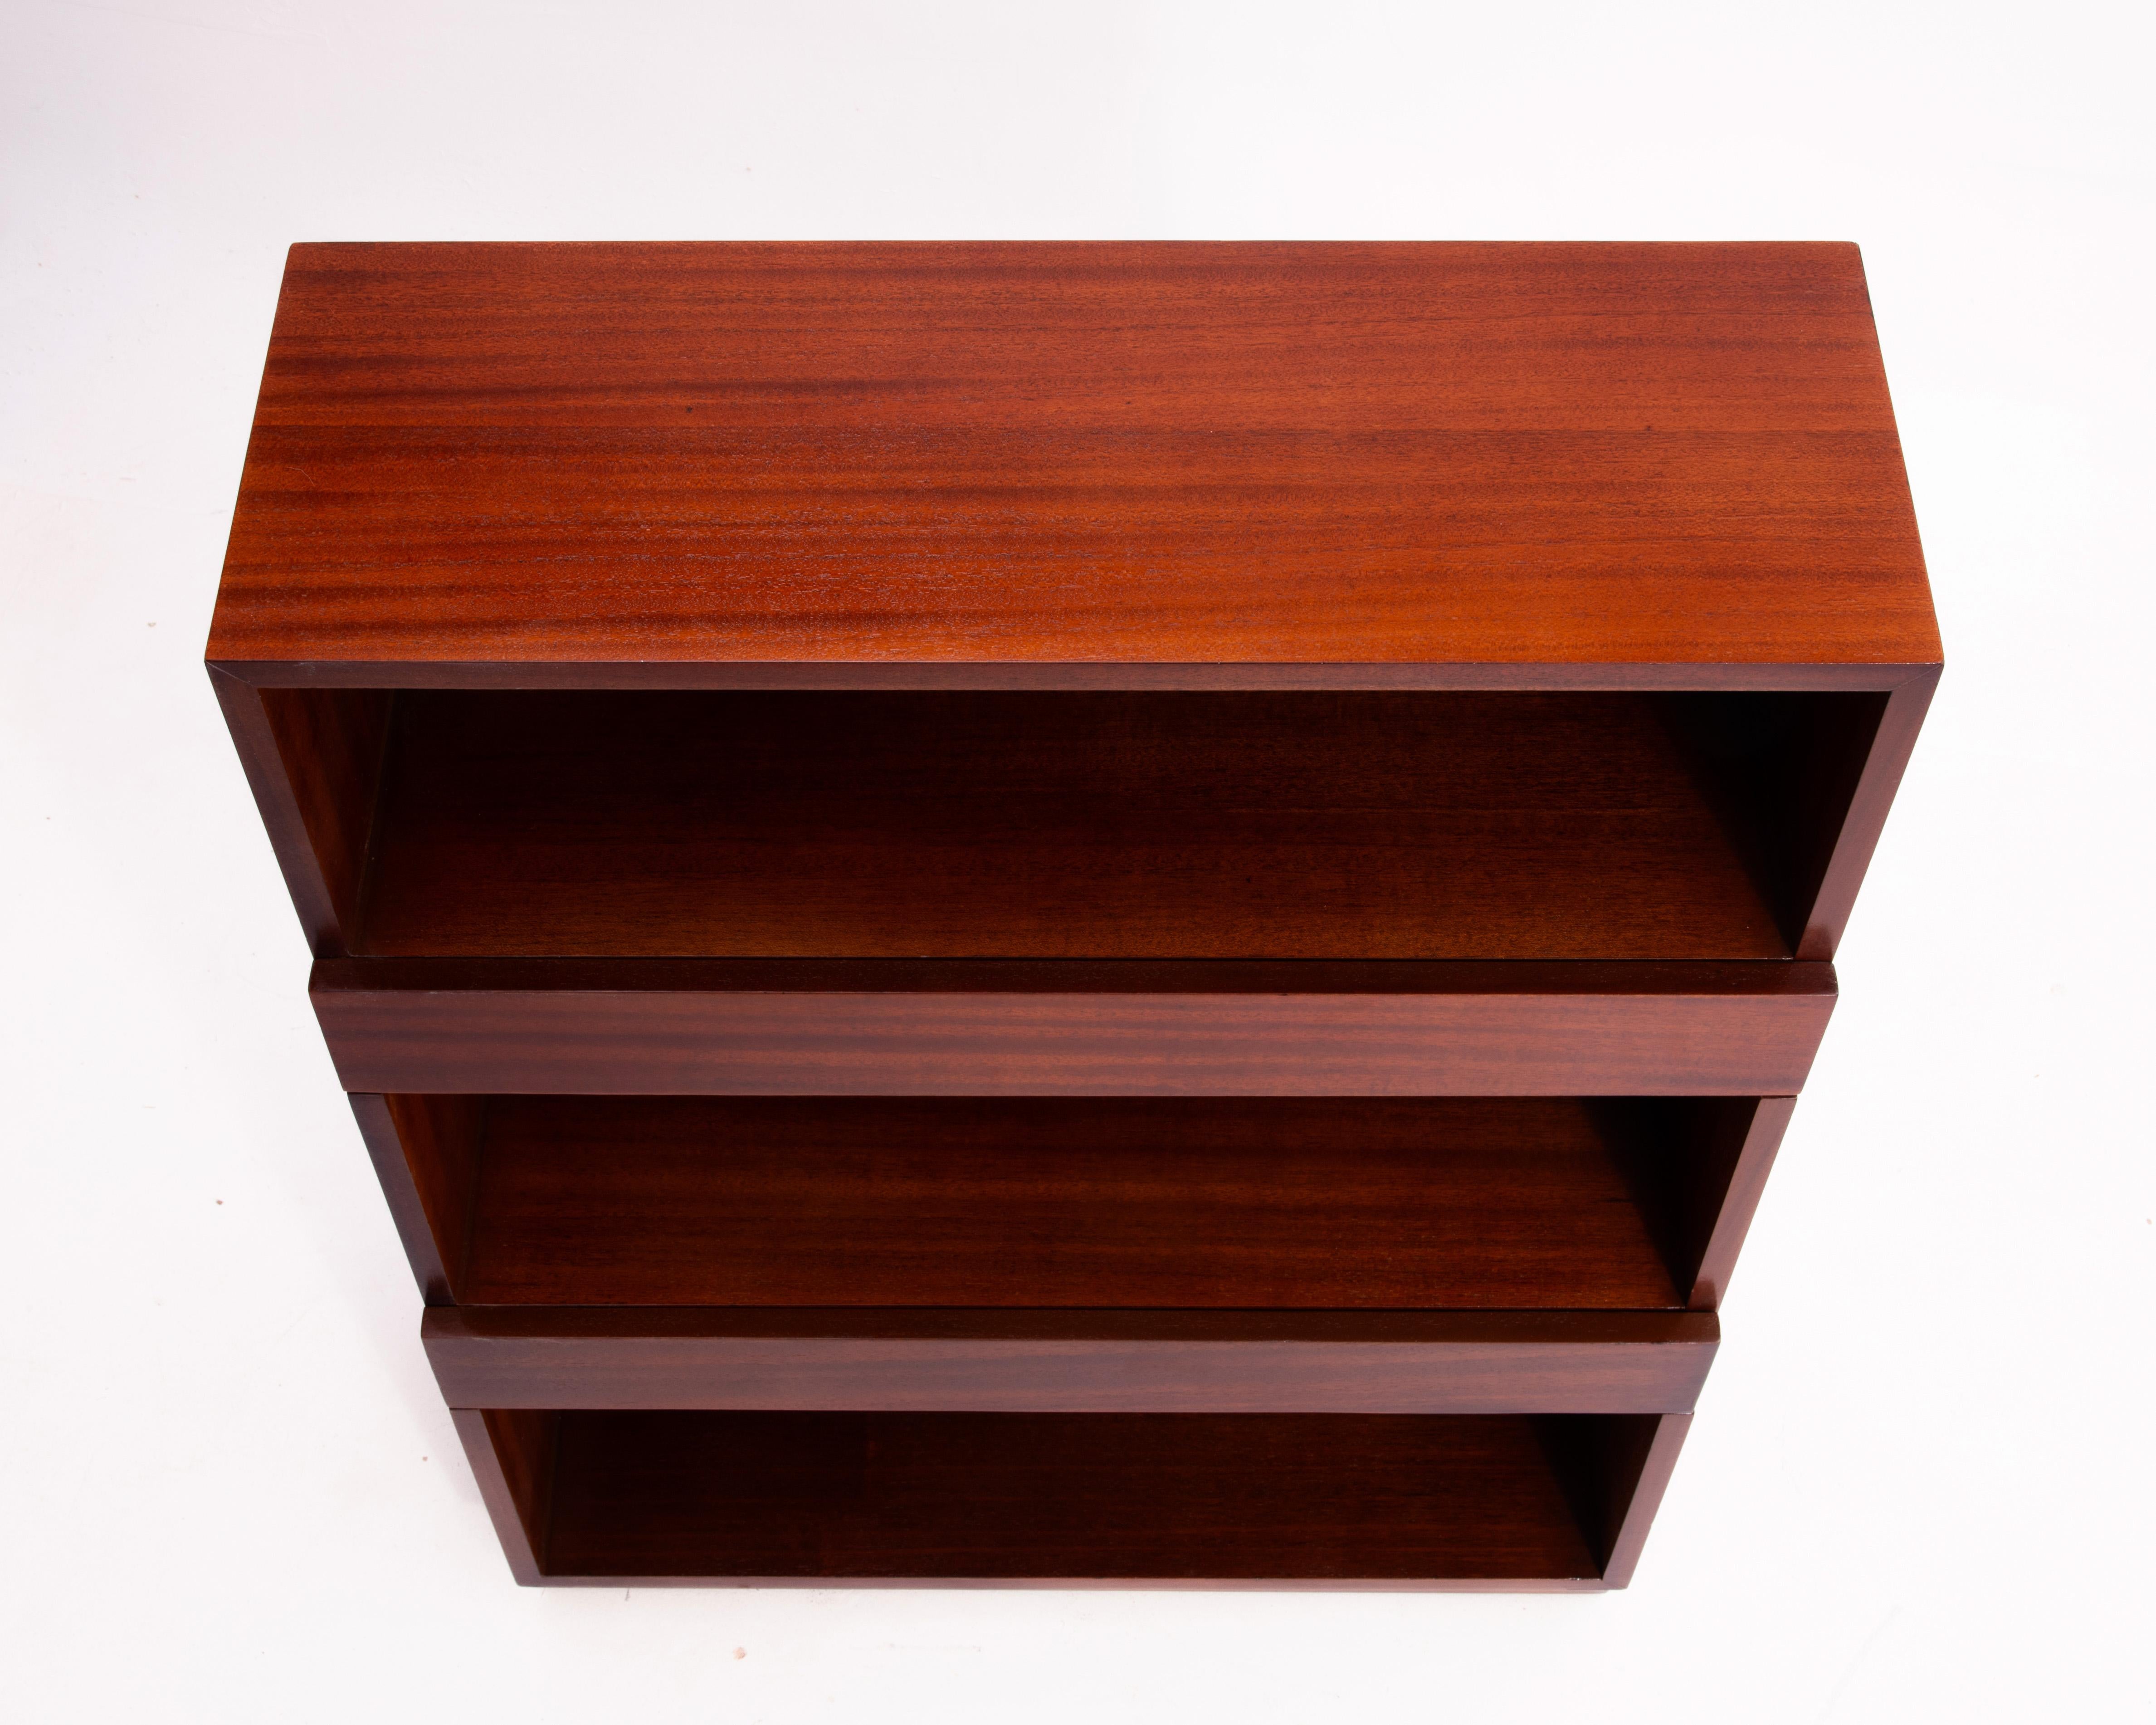 Edward Wormley Dunbar Banded Mahogany Stepped Bookcase 1960s For Sale 2